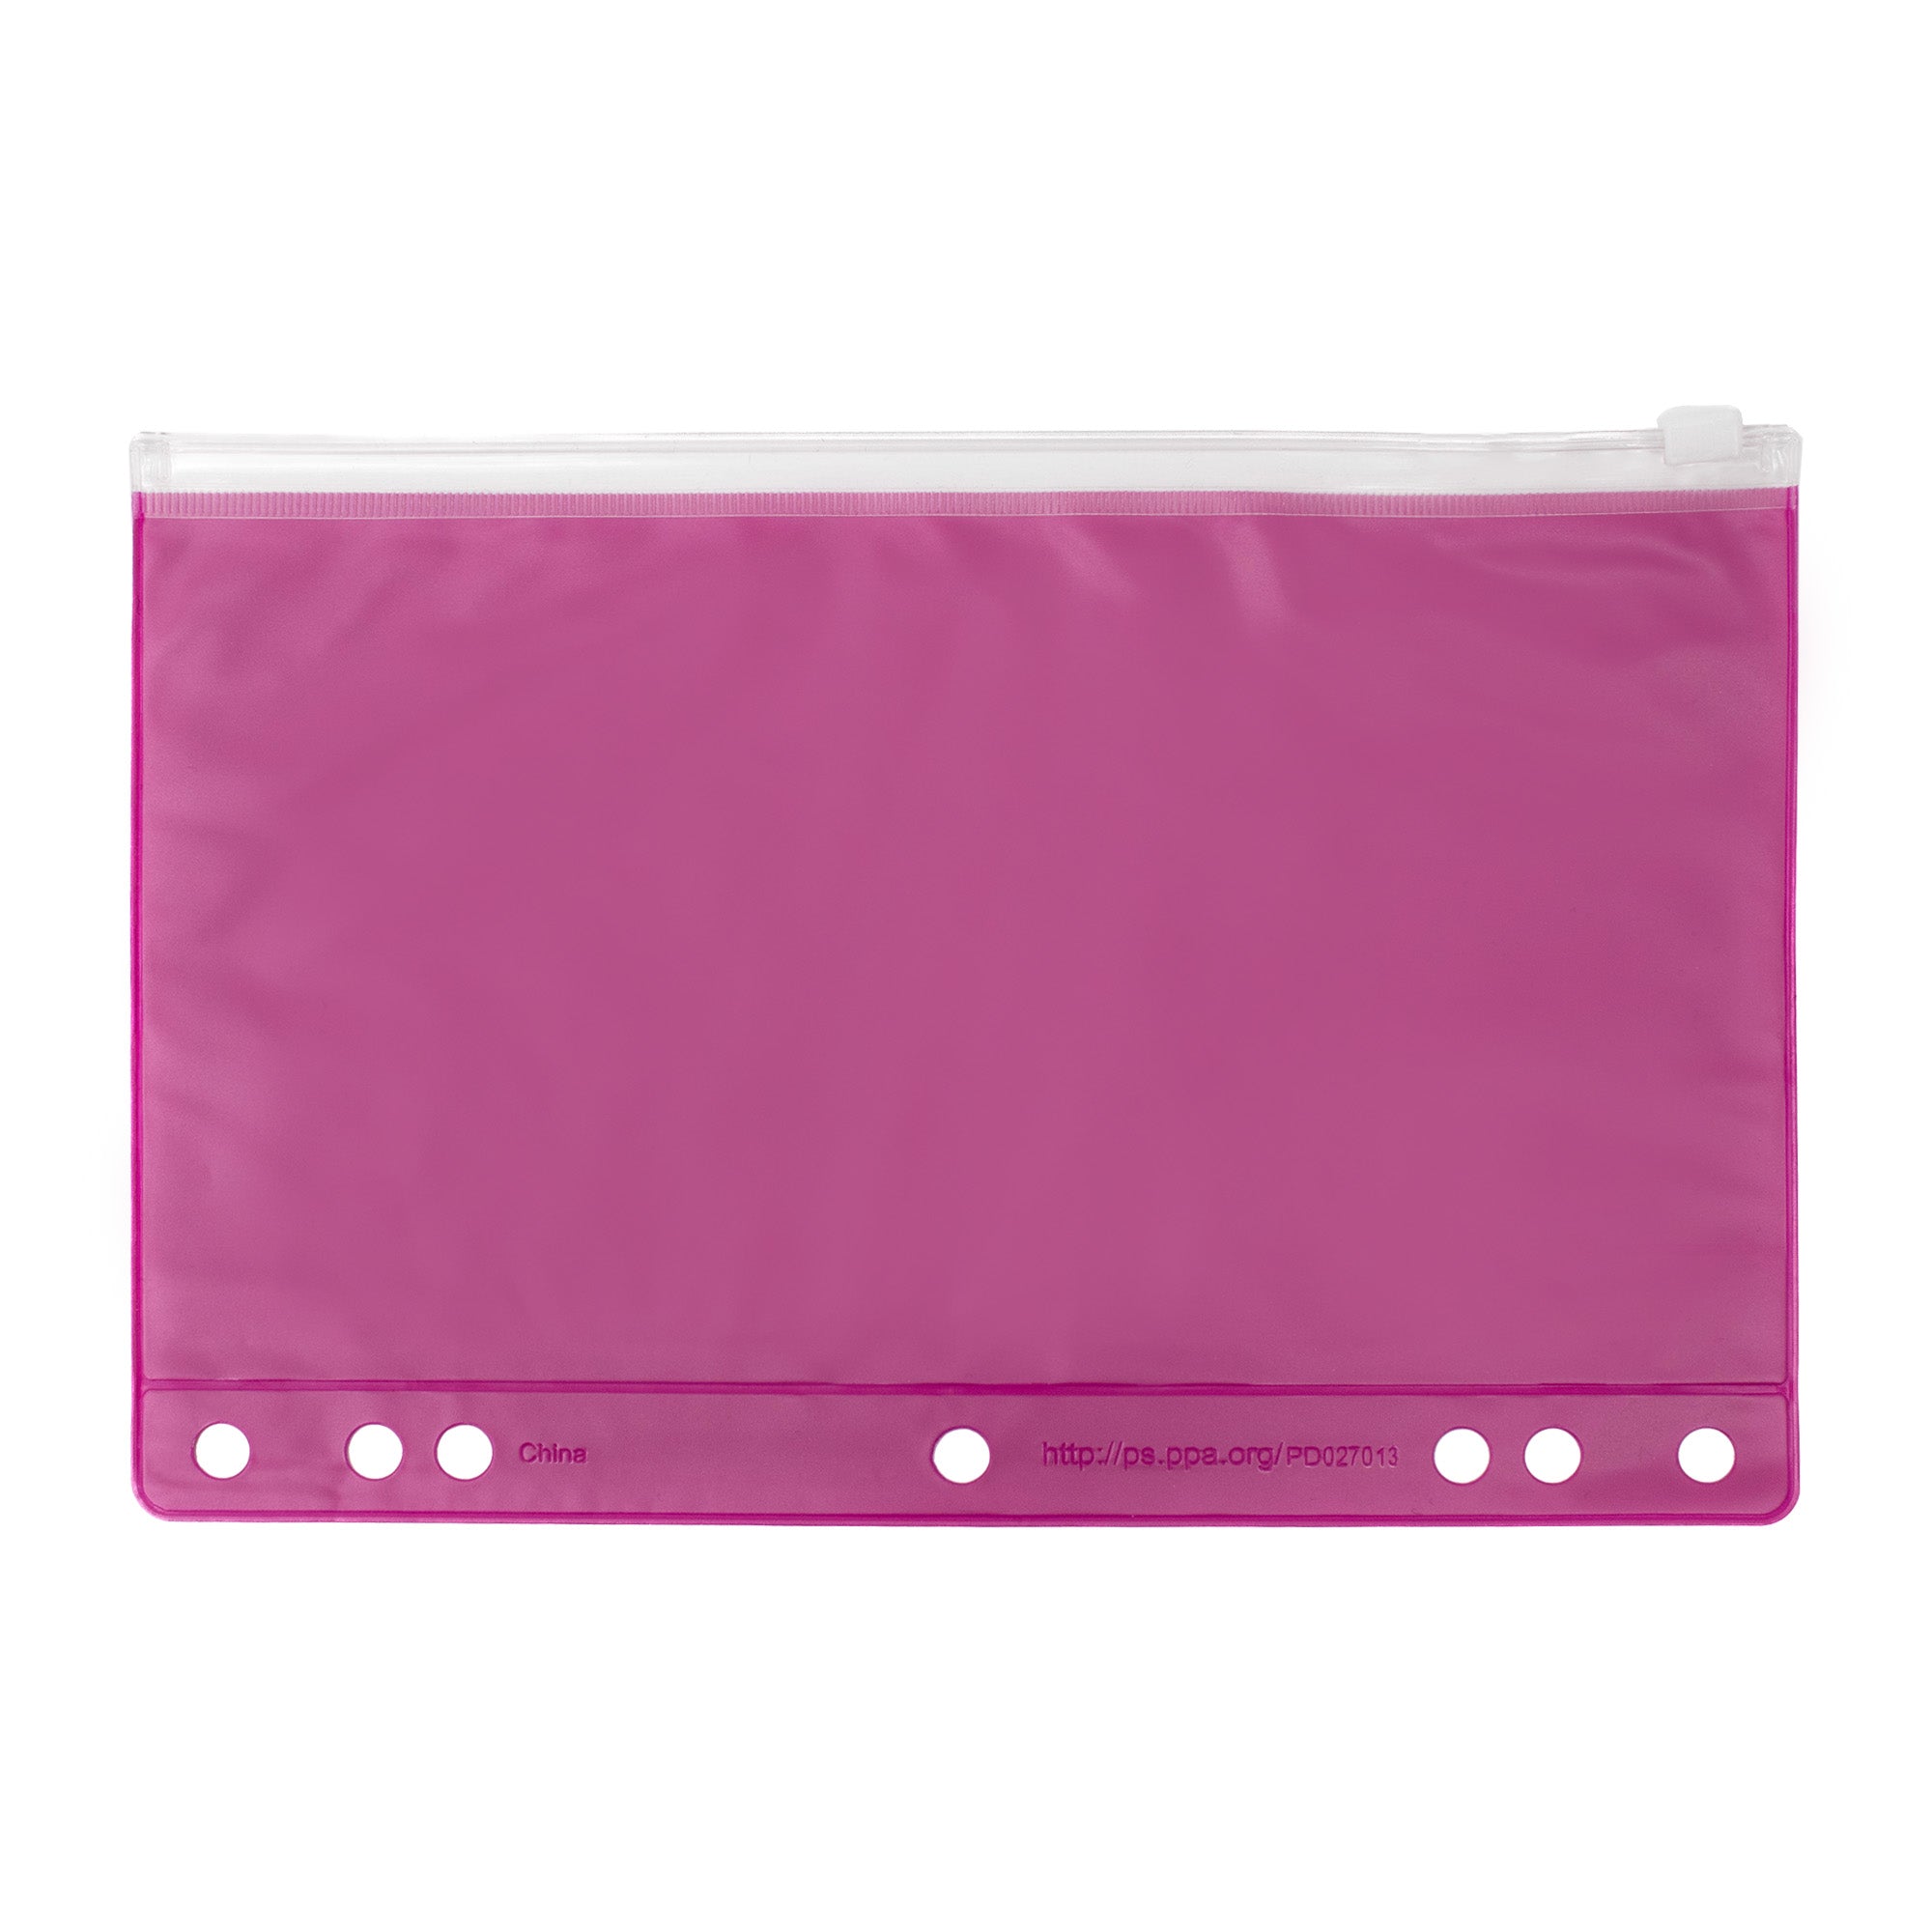 48 Clear and Pink Pencil Pouch - Bulk Case of 48 Pencil Pouches